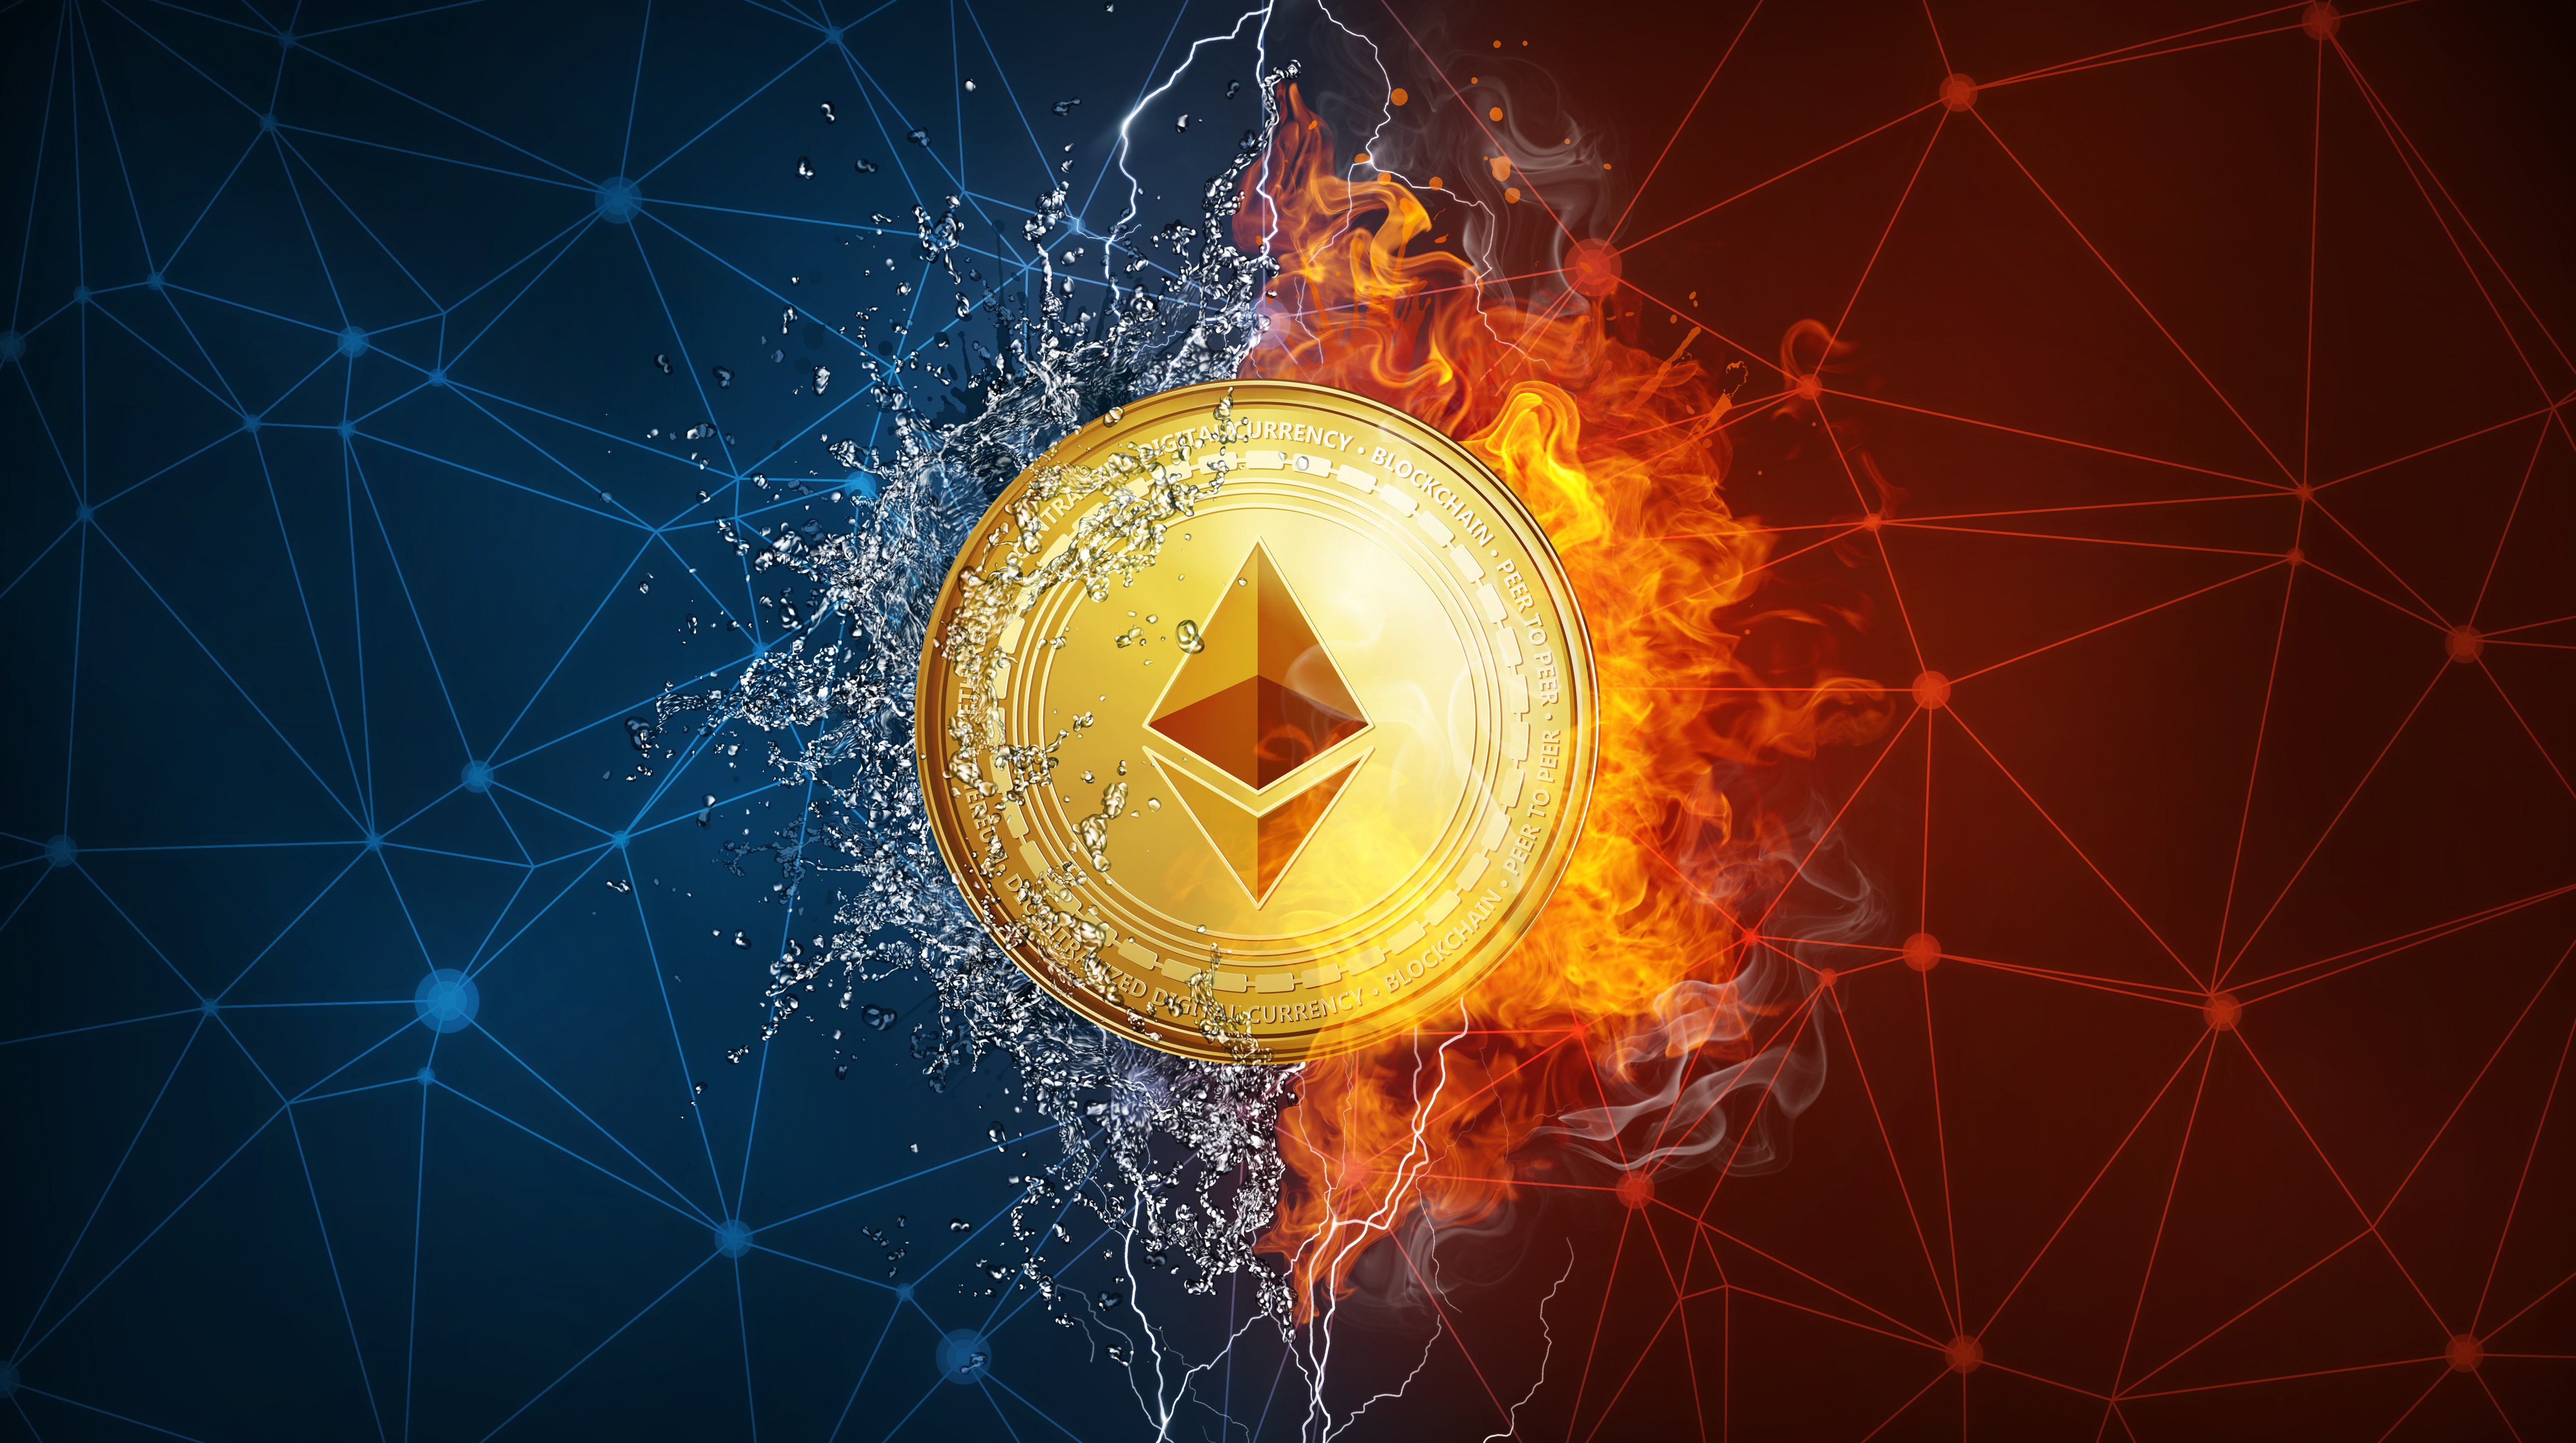 Wallpapers Etherium fire coin on the desktop